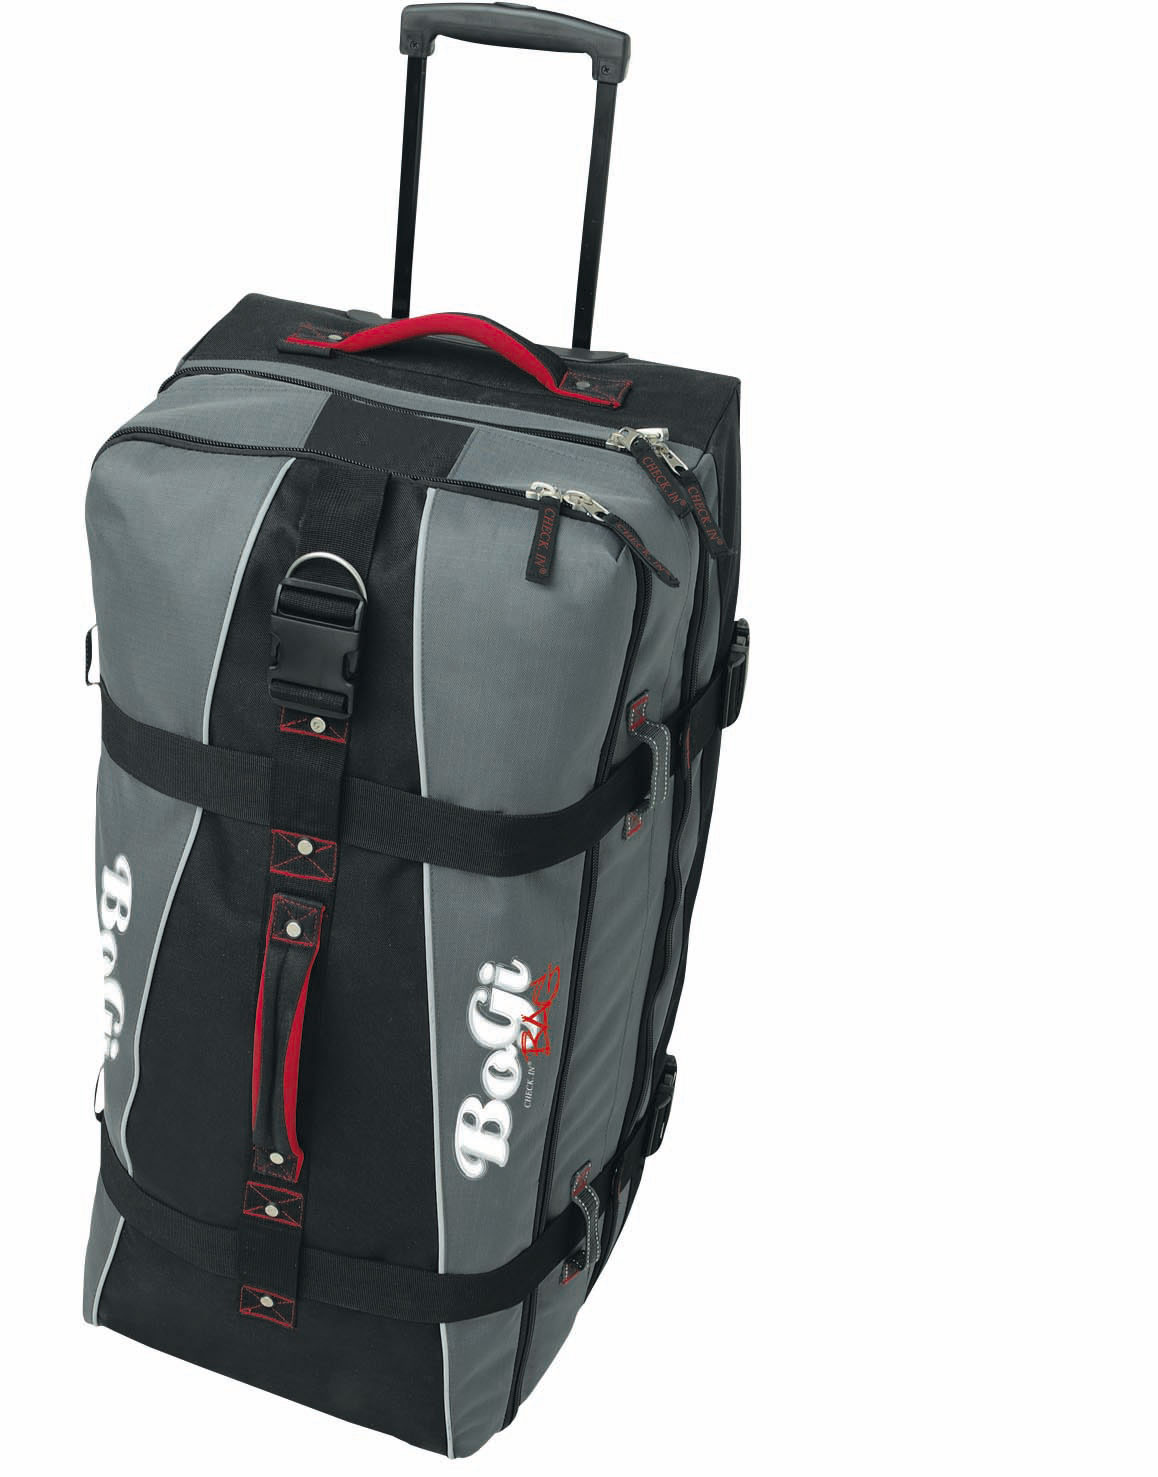 Trolley Travelbag "BoGi"
· separate packing levels
· practical mesh pockets
· inside push button trolley system
· skater wheels with edge protection
· 2 slide bars for stair transport
· robust zippers
· volume compression straps
· comfortable and padded handles  - černá - foto